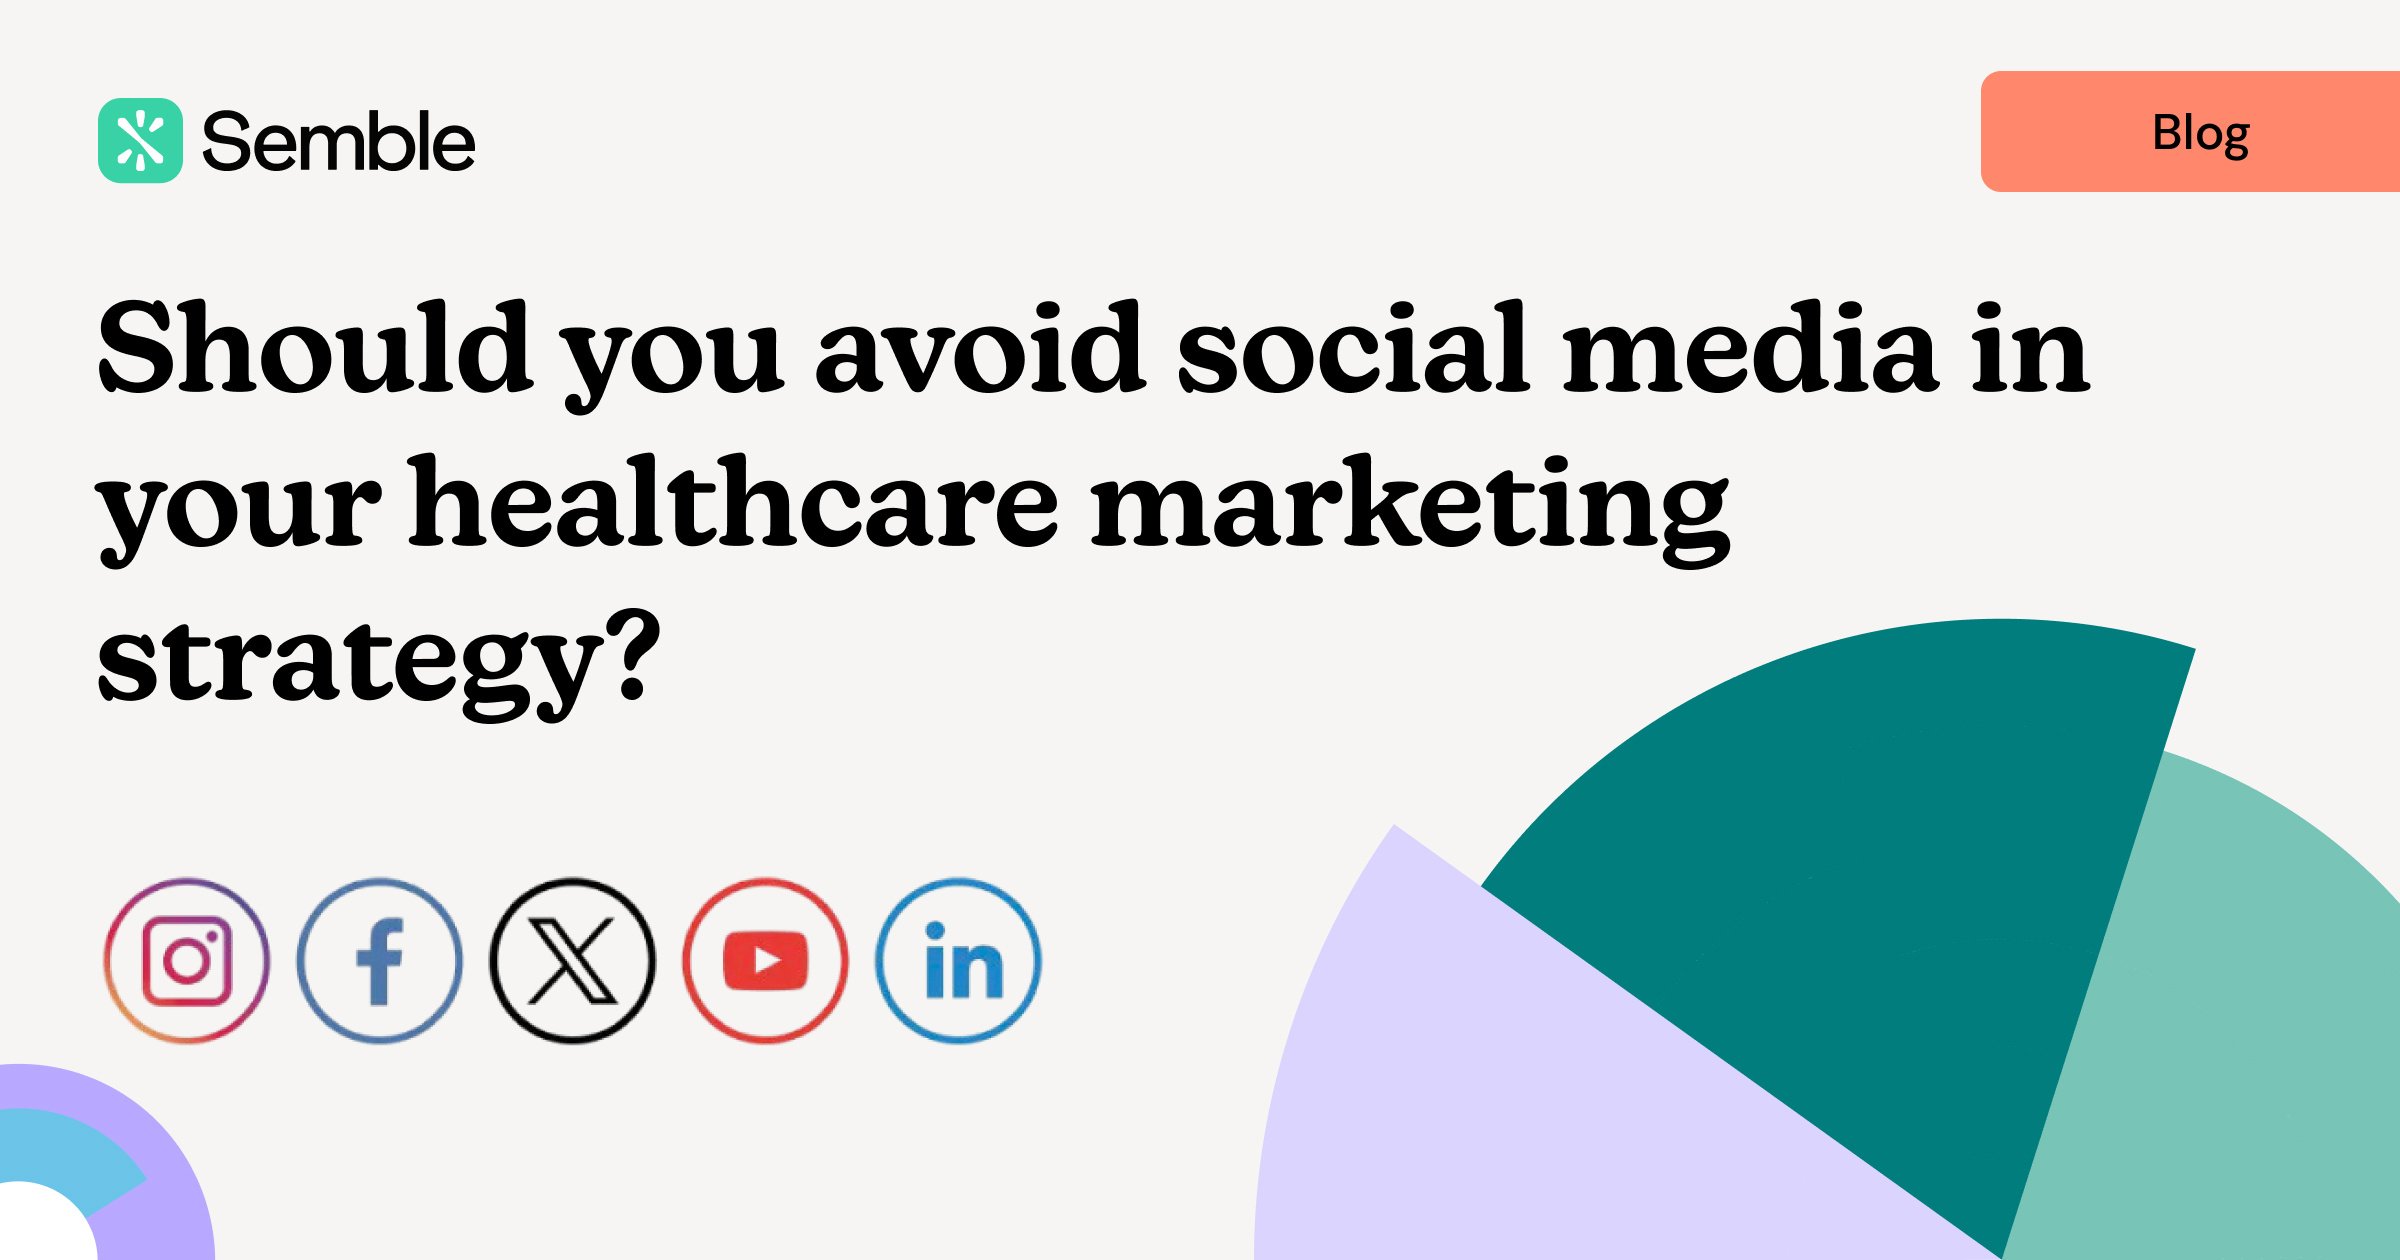 Should you avoid social media in your healthcare marketing strategy?